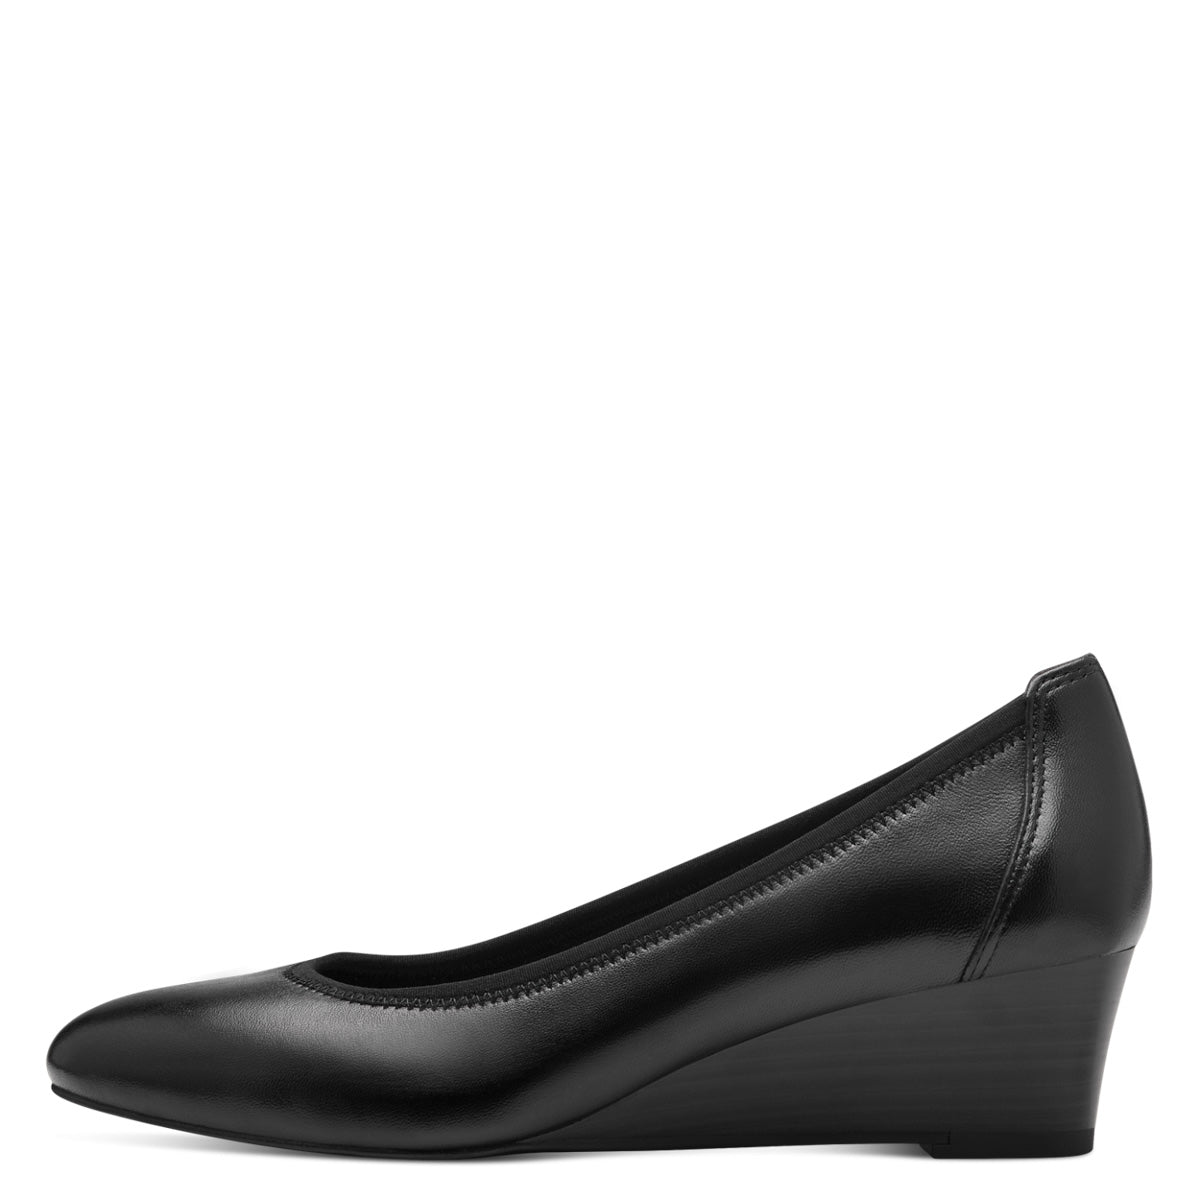 Front view of the Tamaris Black Leather Wedge Pump.